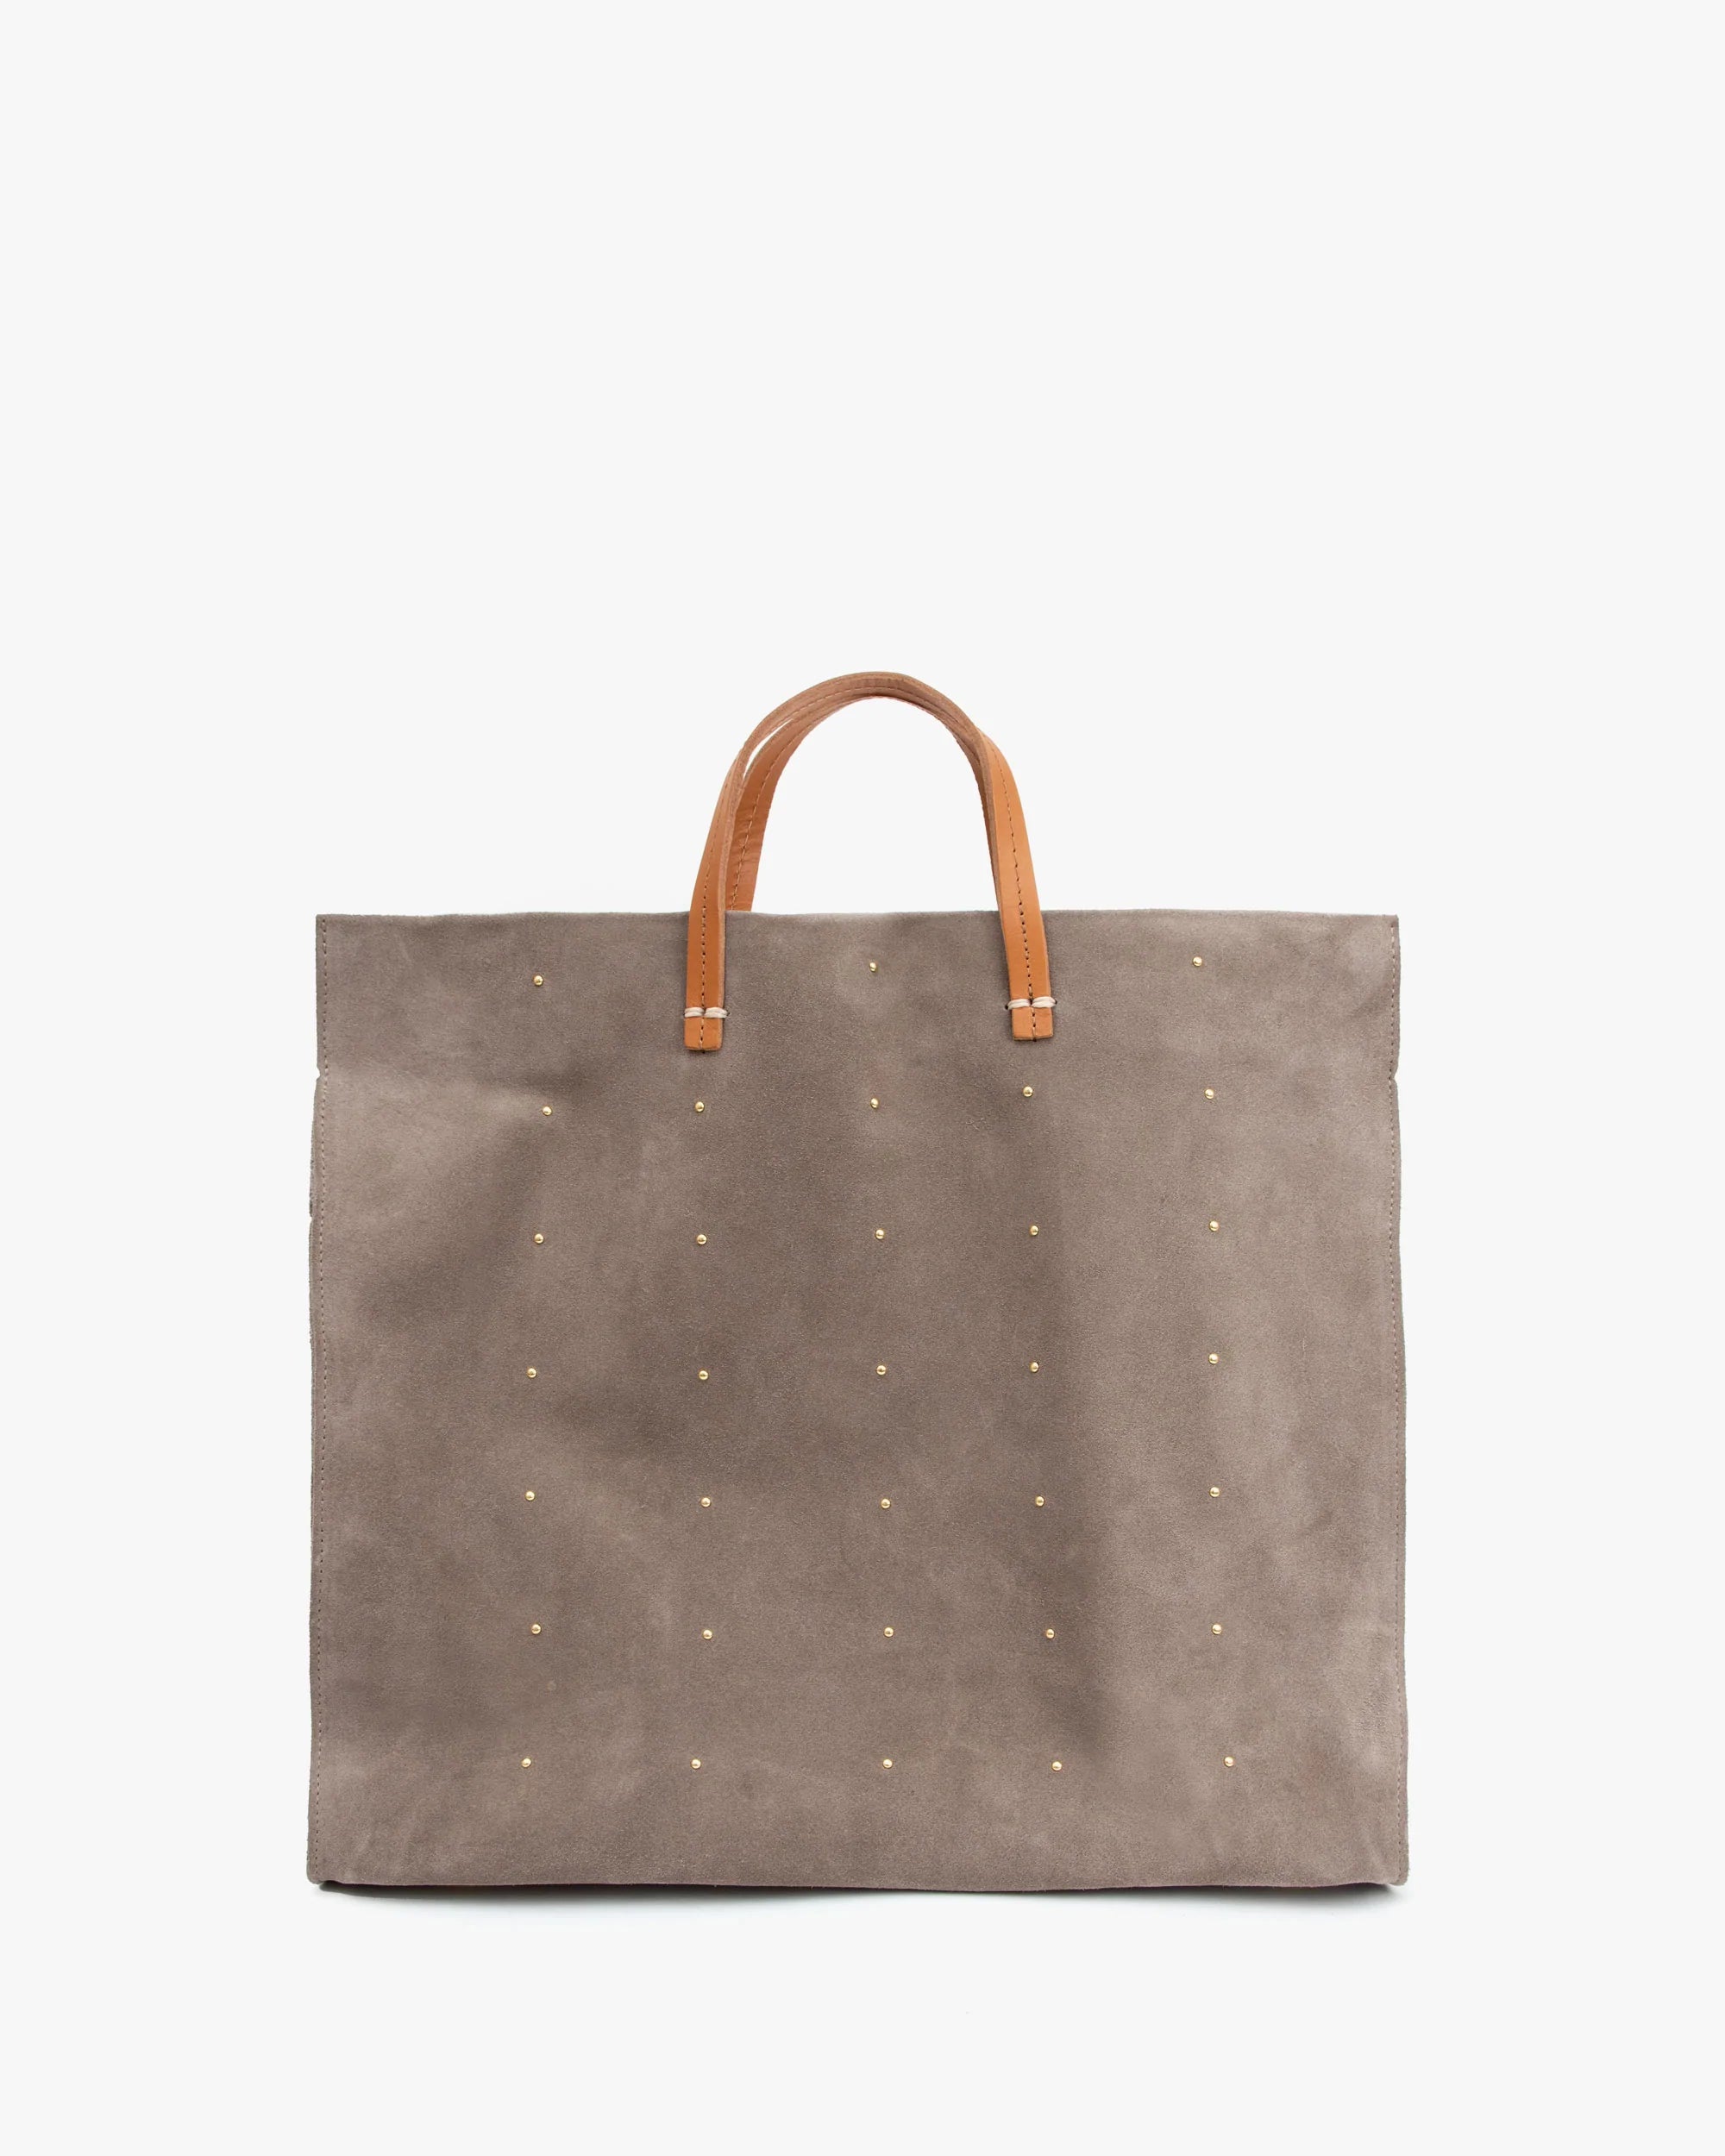 Clare V. Perforated Leather Tote - Neutrals Totes, Handbags